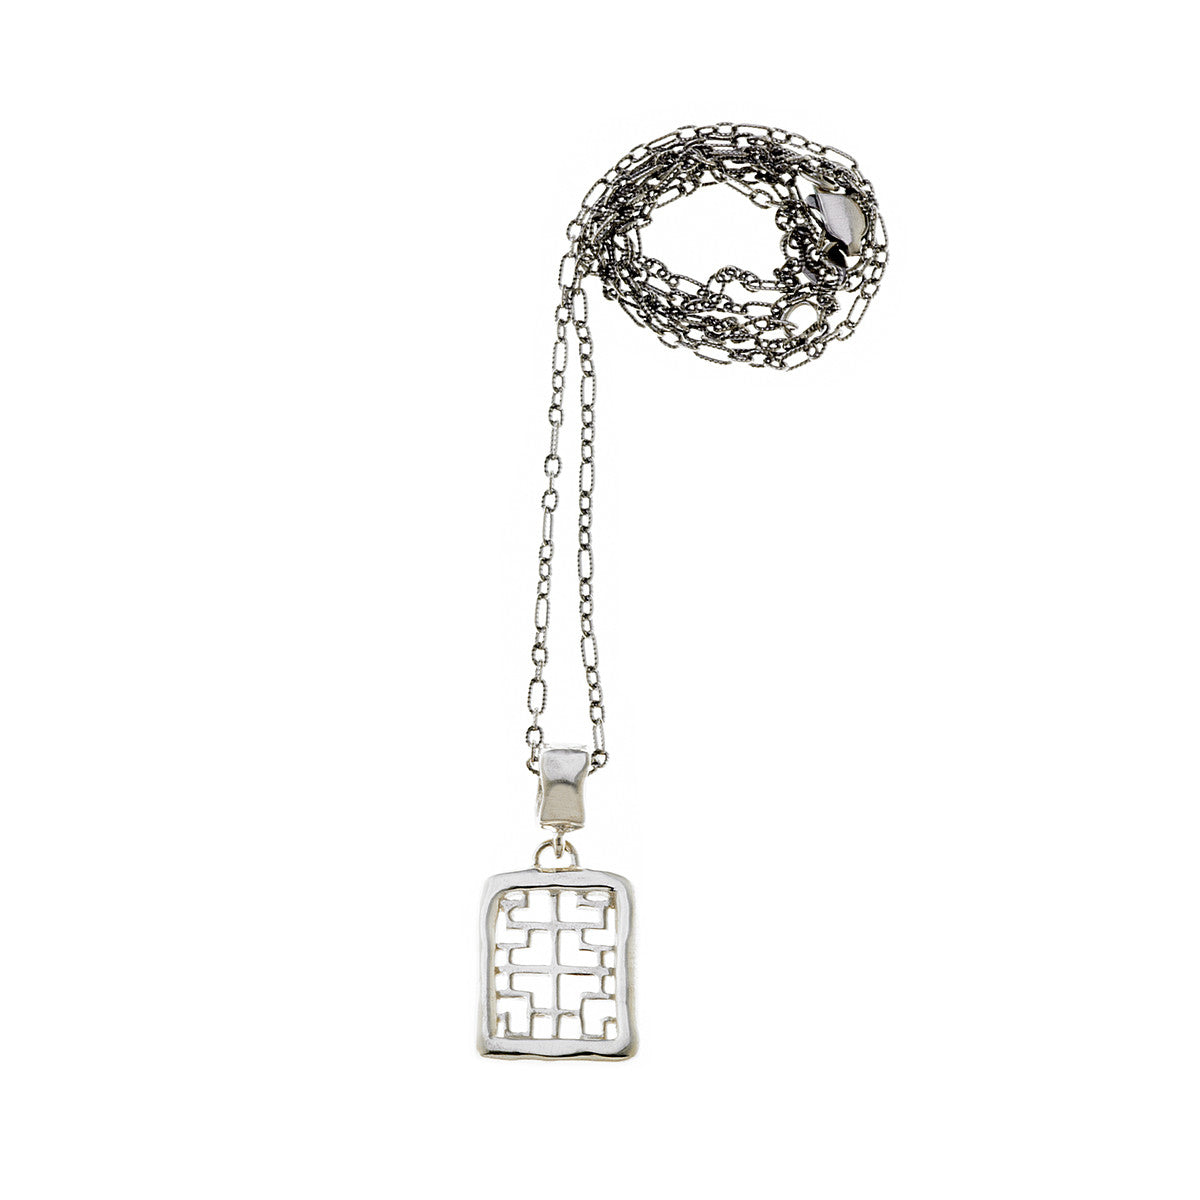 Mystical Pagoda Square Sterling Silver Necklace - Cynthia Gale New York Jewelry